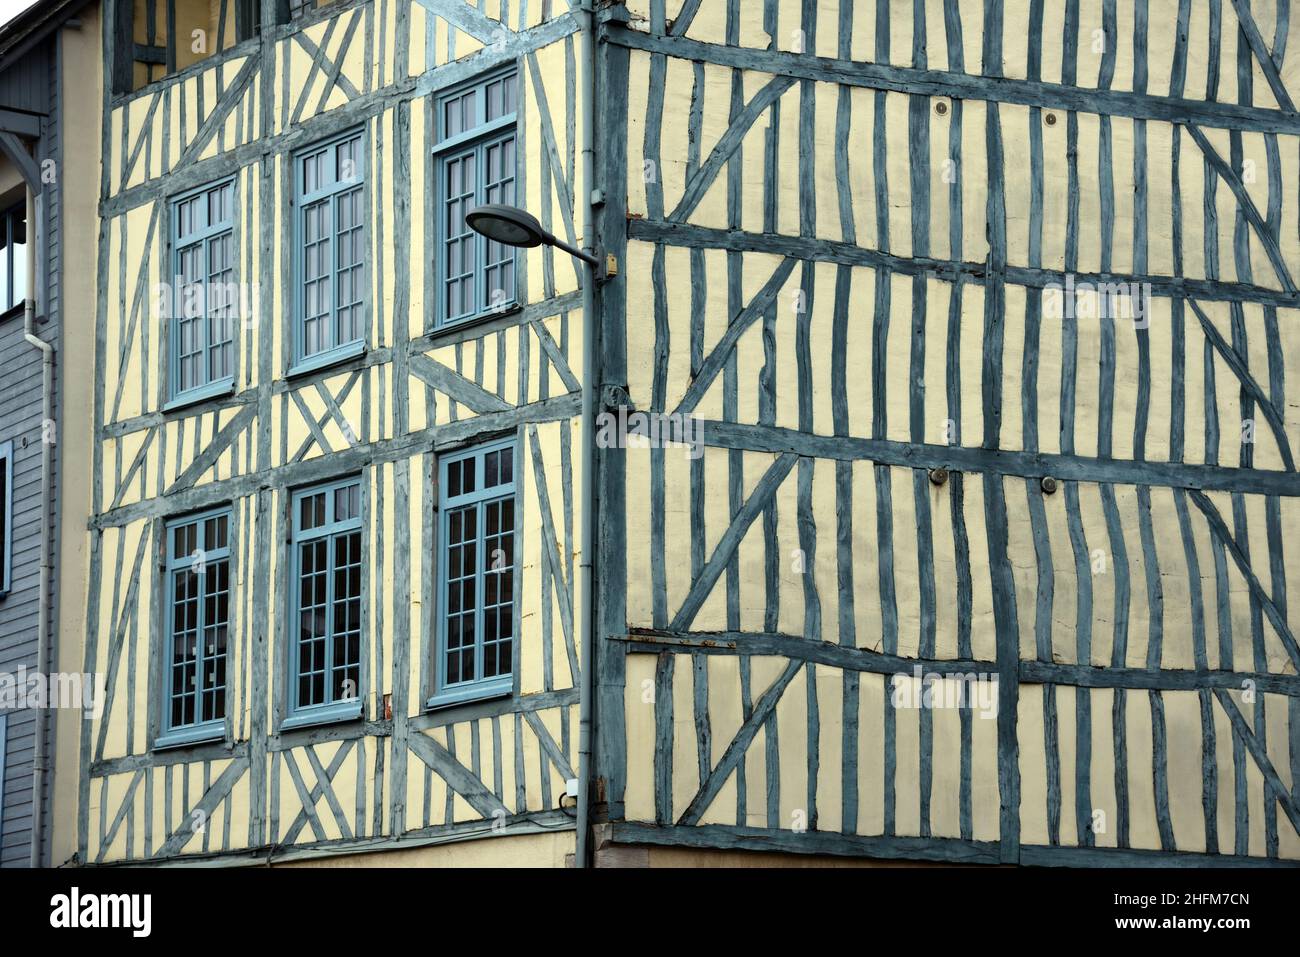 Window Pattern of Old Timber-frame House or Townhouse Facade of c17th Historic Building in the Old Town Rouen Normandy France Stock Photo